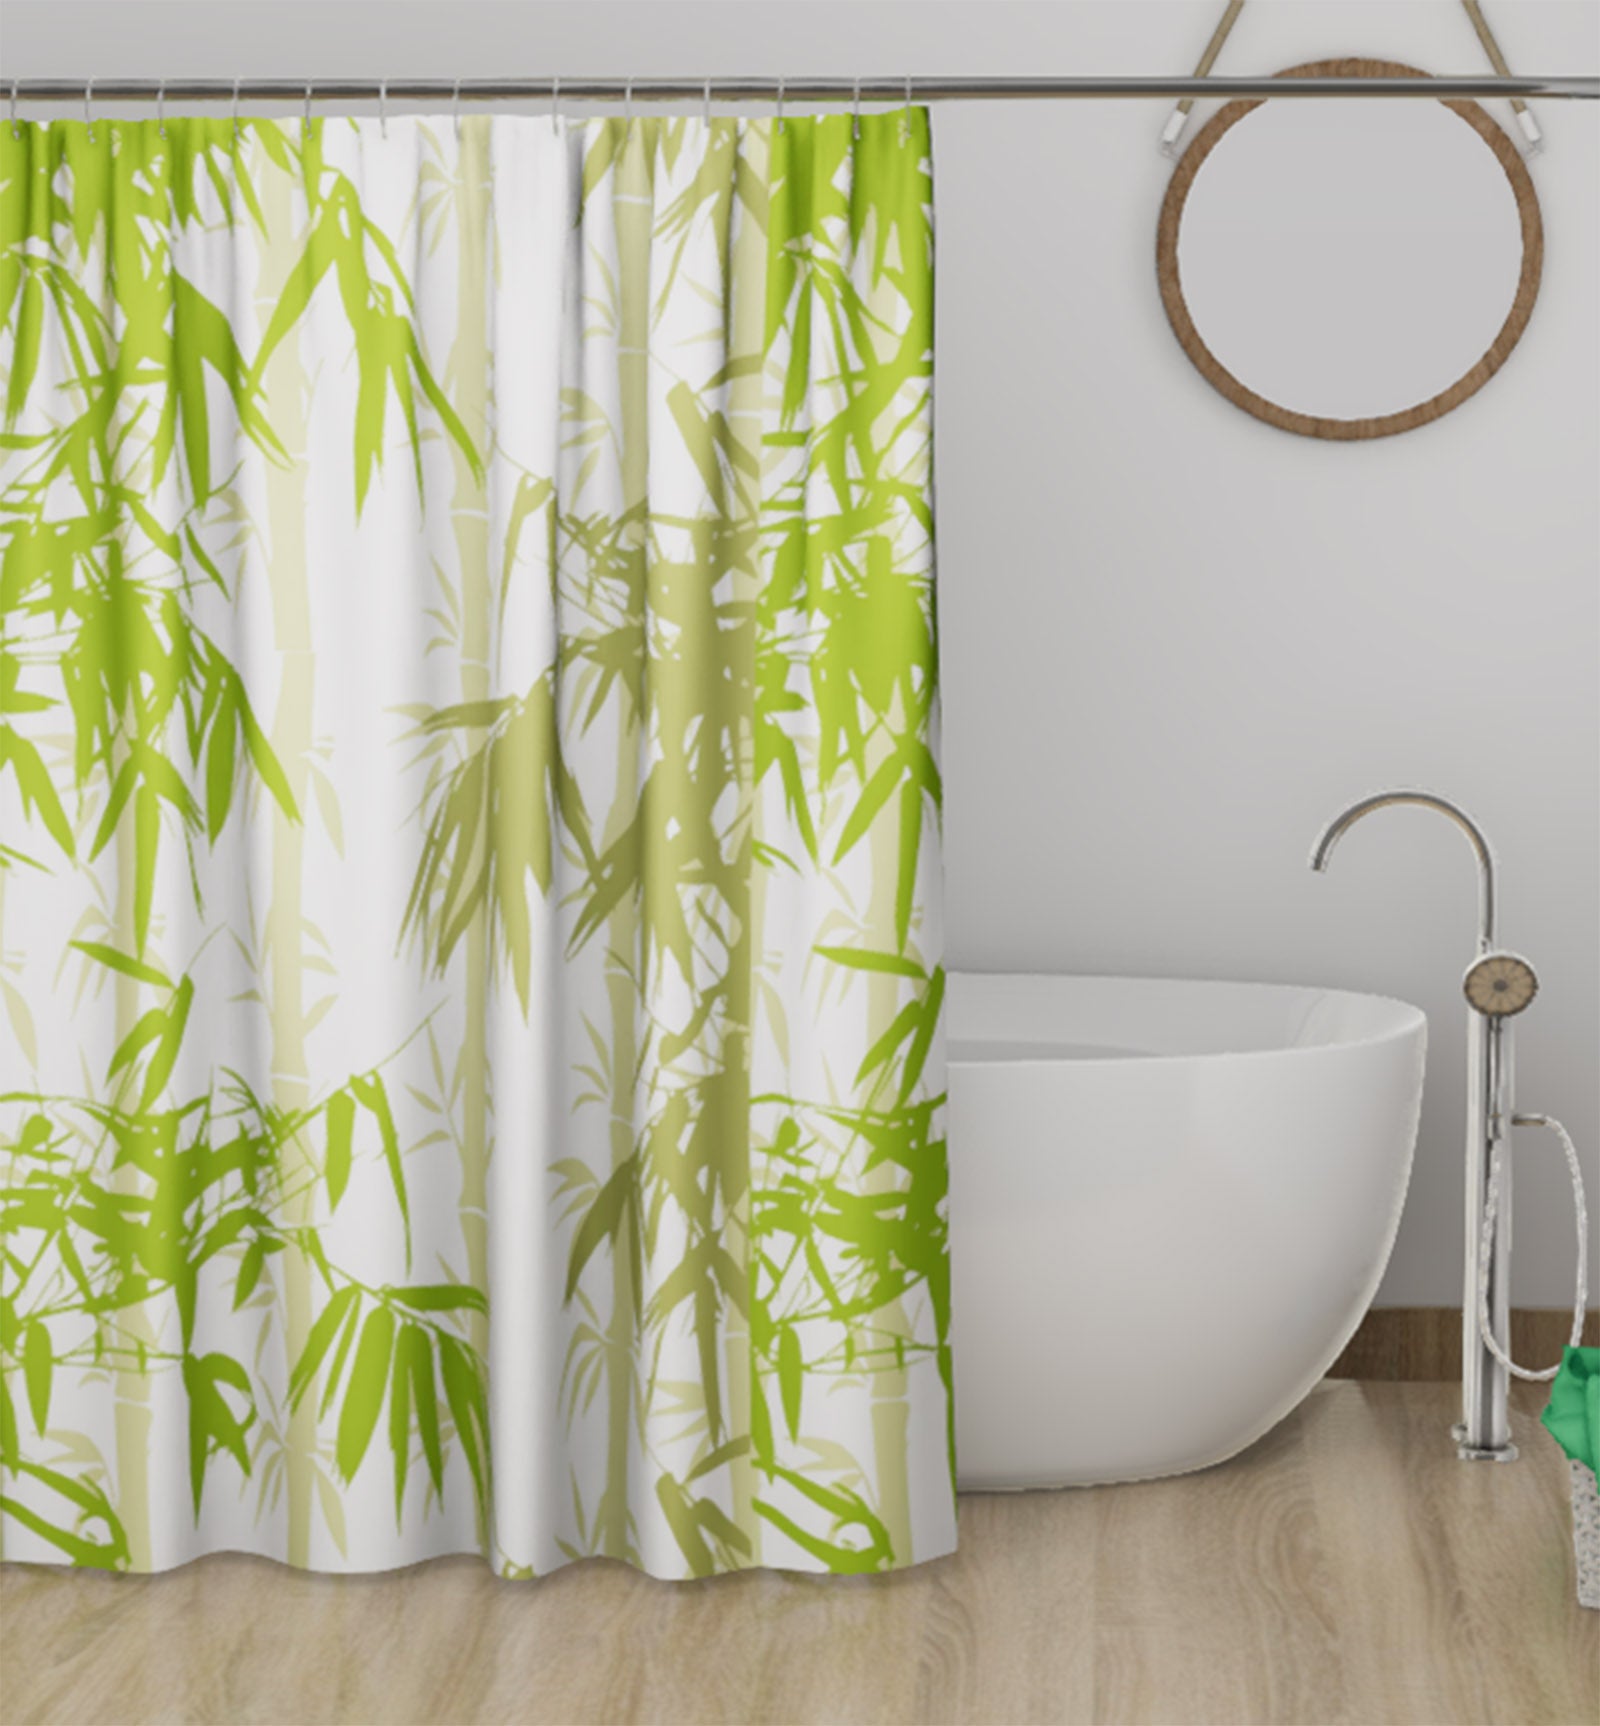 Lushomes Bamboo Water Repellent Digital Printed Bathroom Shower Curtain with 12 Plastic Eyelets and 12 Hooks (Single pc, 72’ x 80’, 180 x 200 cms) - Lushomes